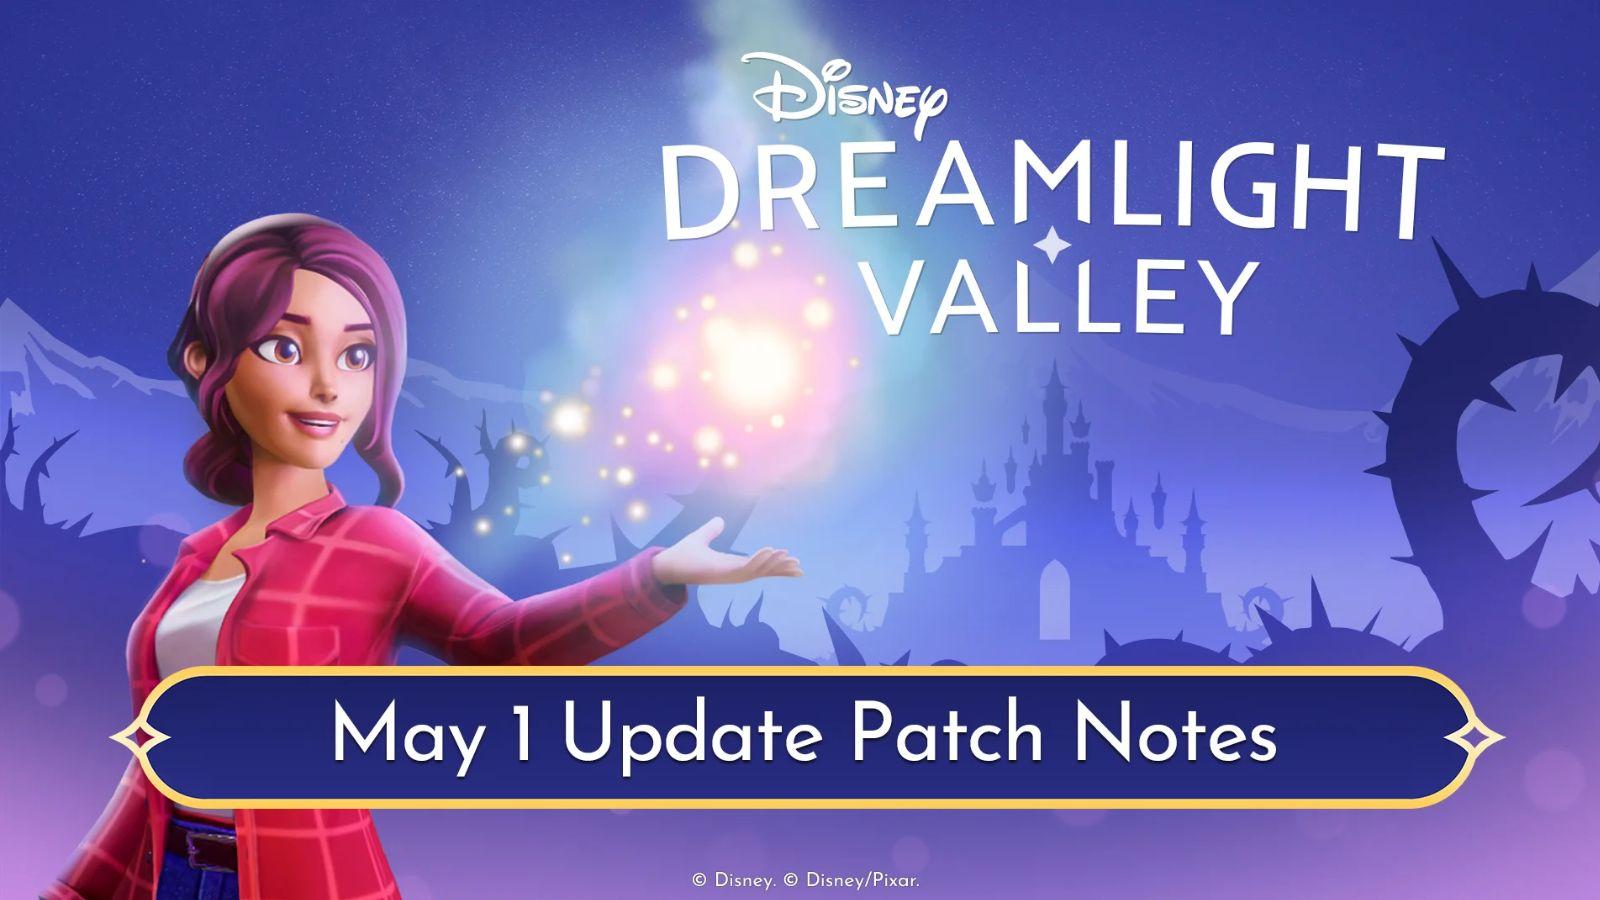 Disney Dreamlight Valley's May 1 patch notes